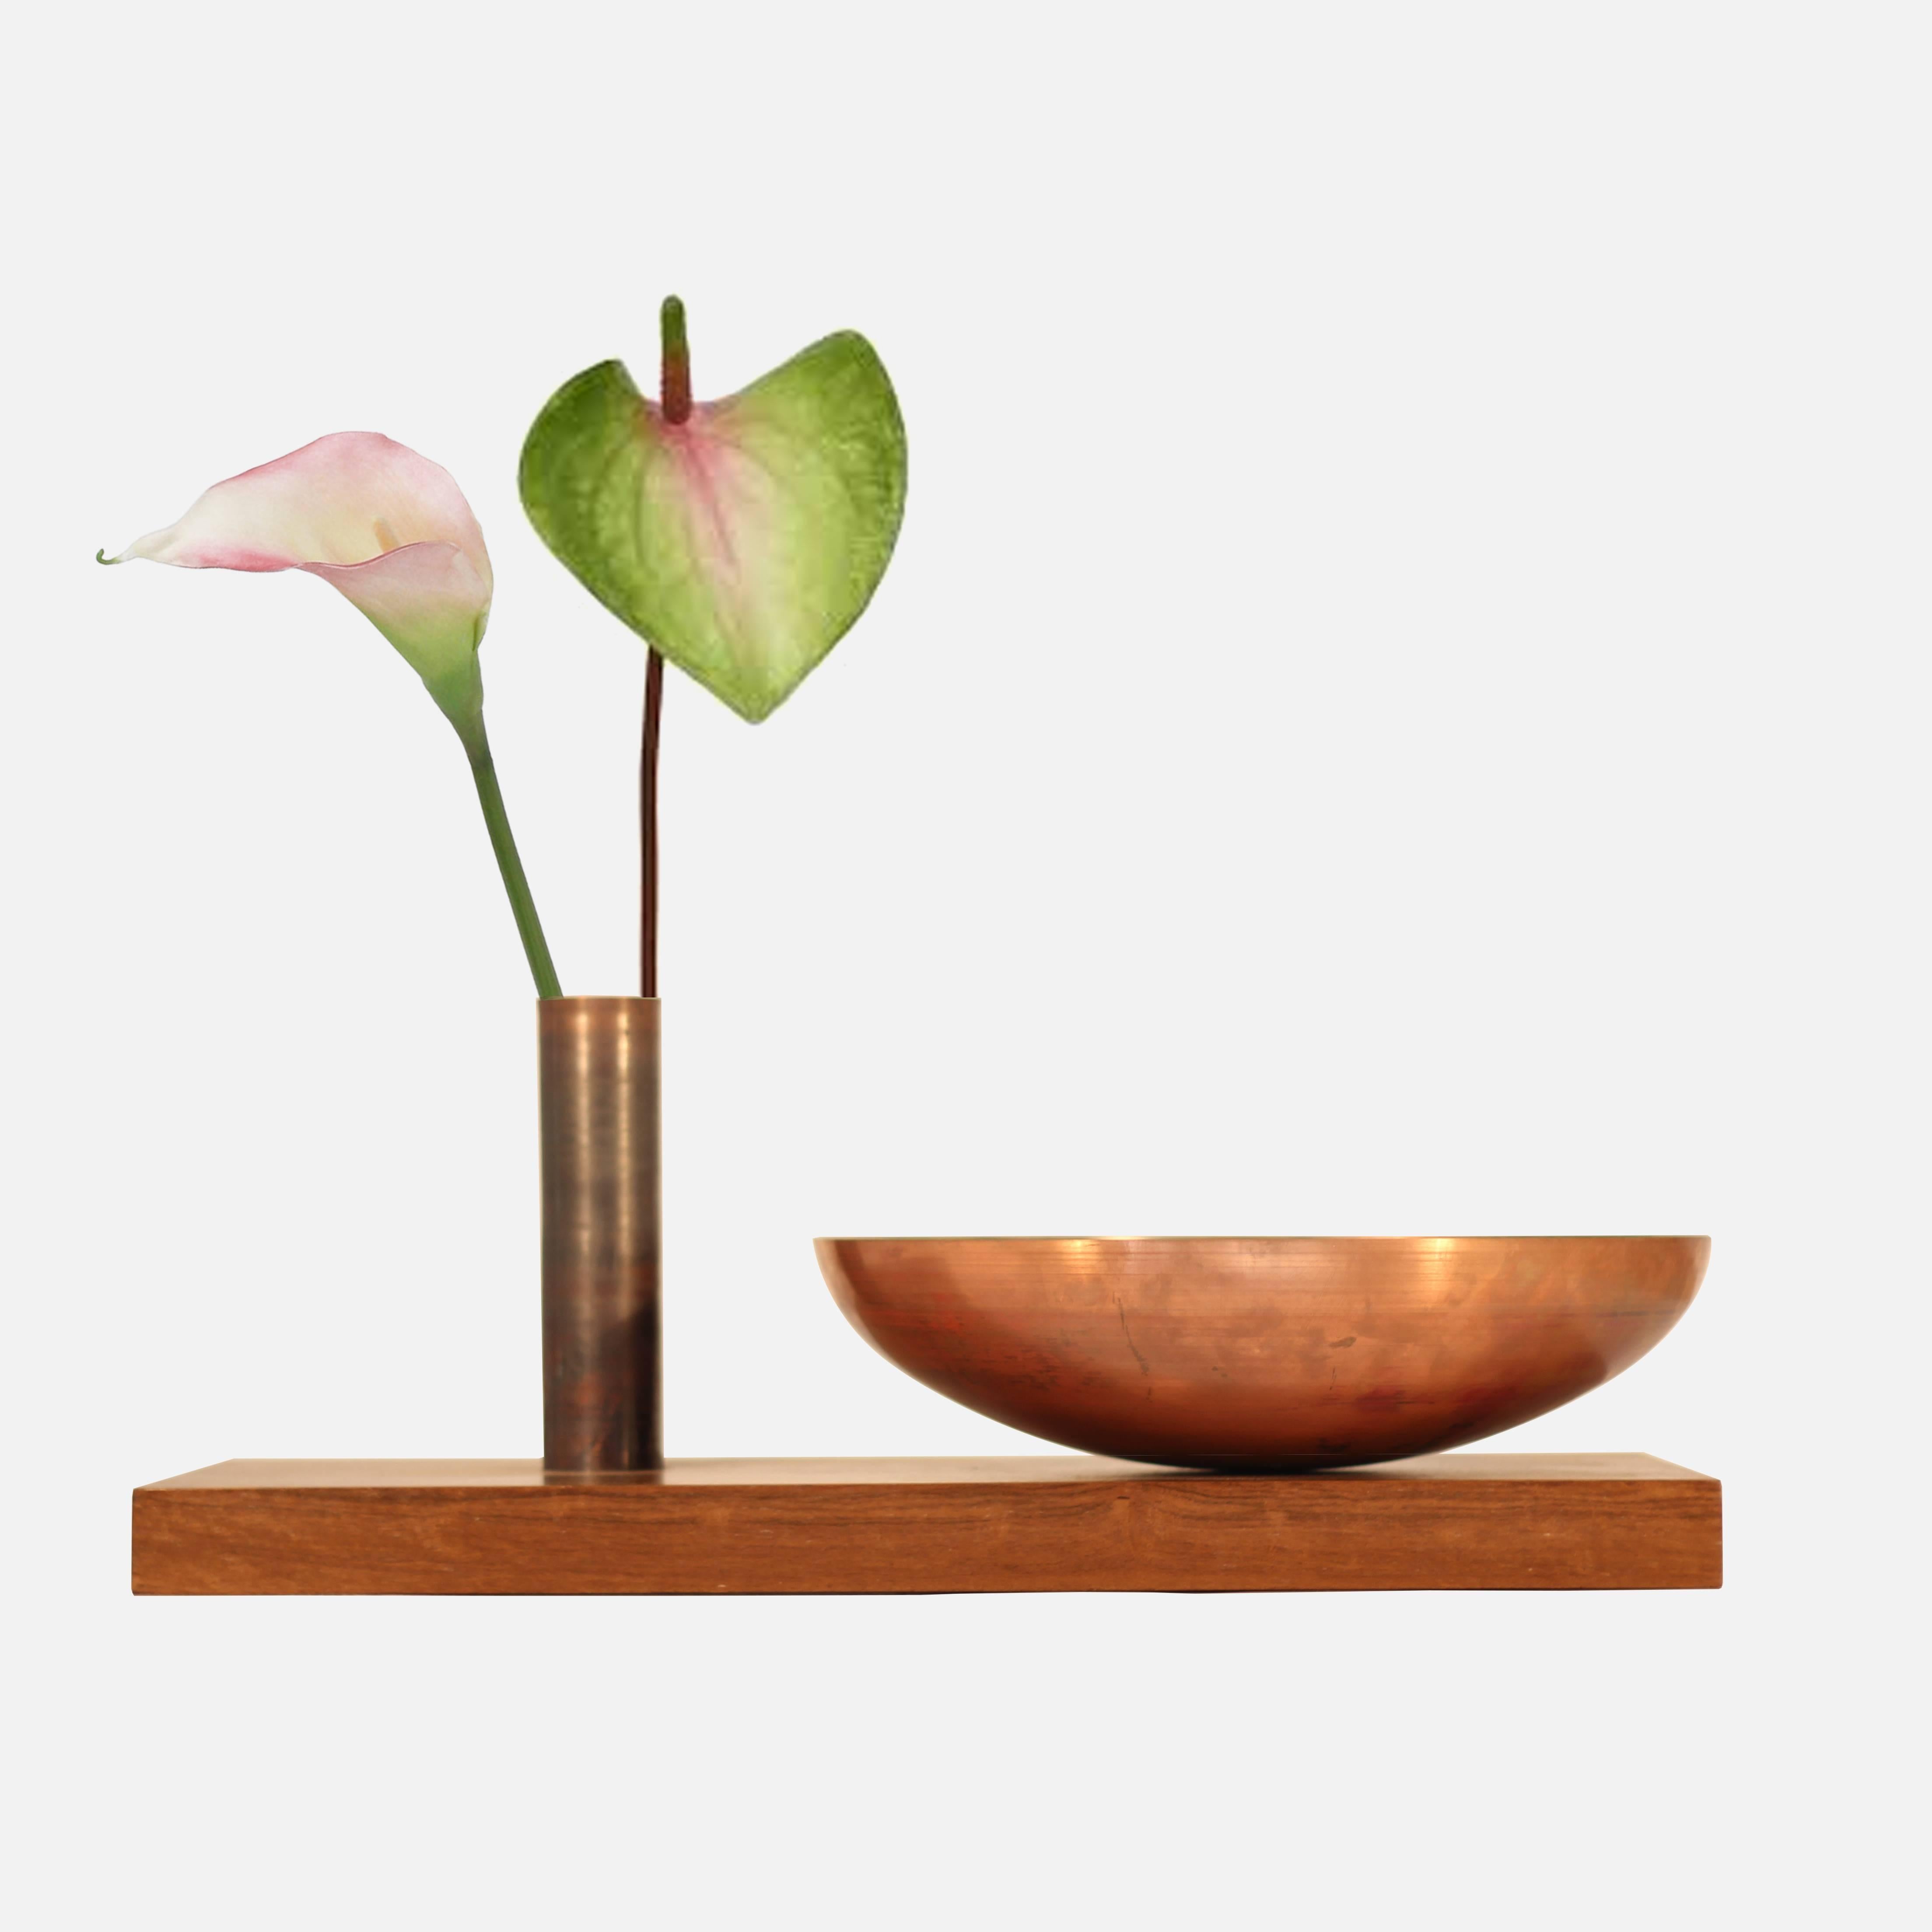 Brazilian modernist fruit bowl, in copper and Imbuia wood laminated. Brazil, contemporary designer. In stock.
 
 